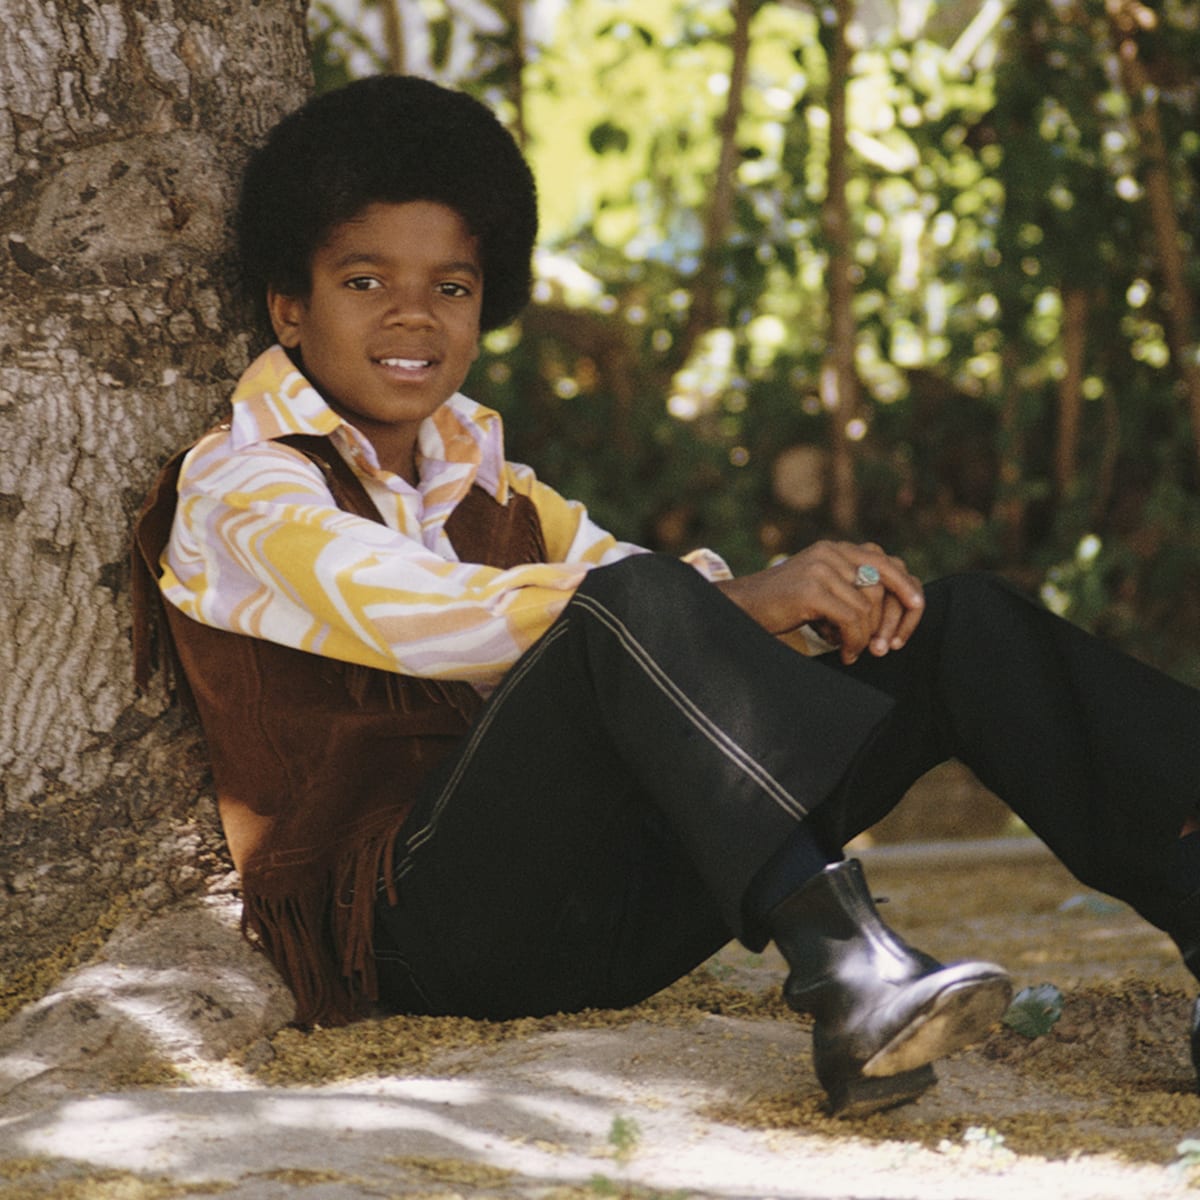 michael jackson 1958 2009 relaxes under a tree april 1970 photo by michael ochs archives getty images